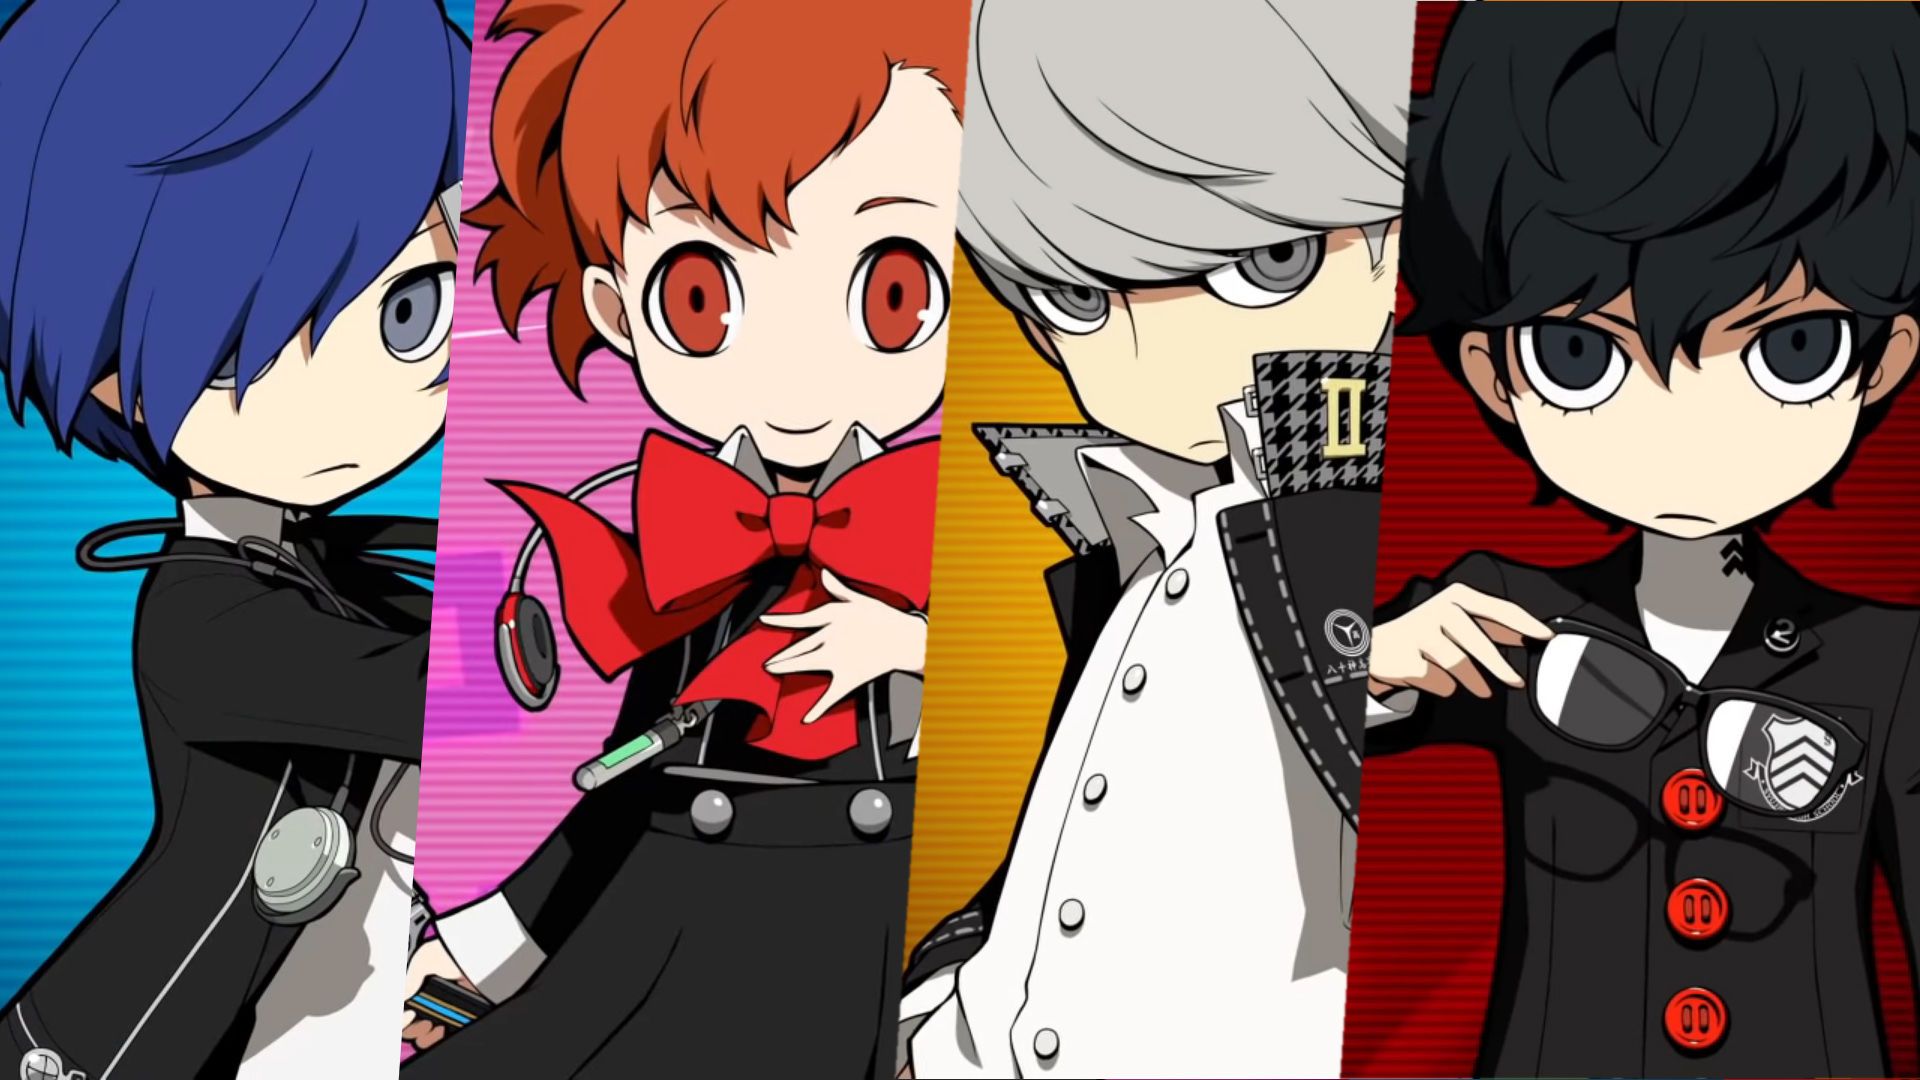 Persona Q2: New Cinema Labyrinth to get 27 pieces of DLC at launch